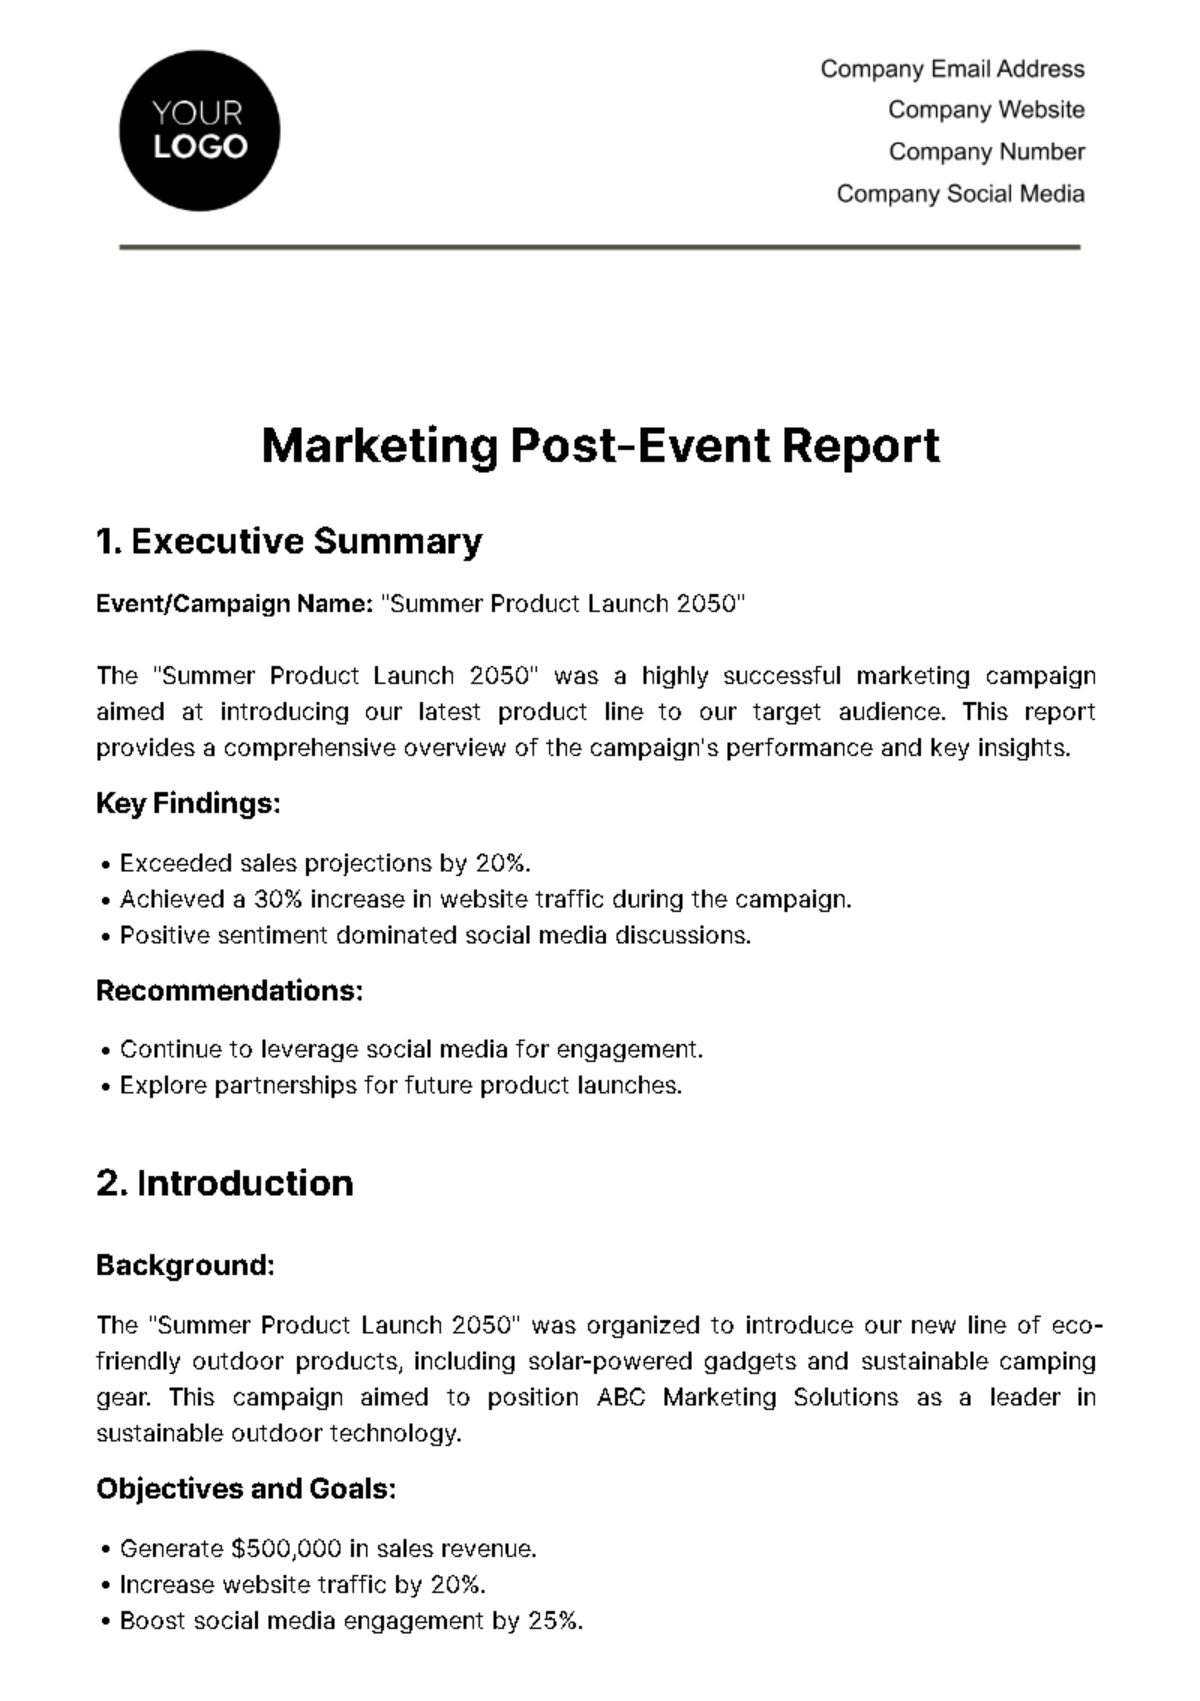 Free Marketing Post-Event Report Template